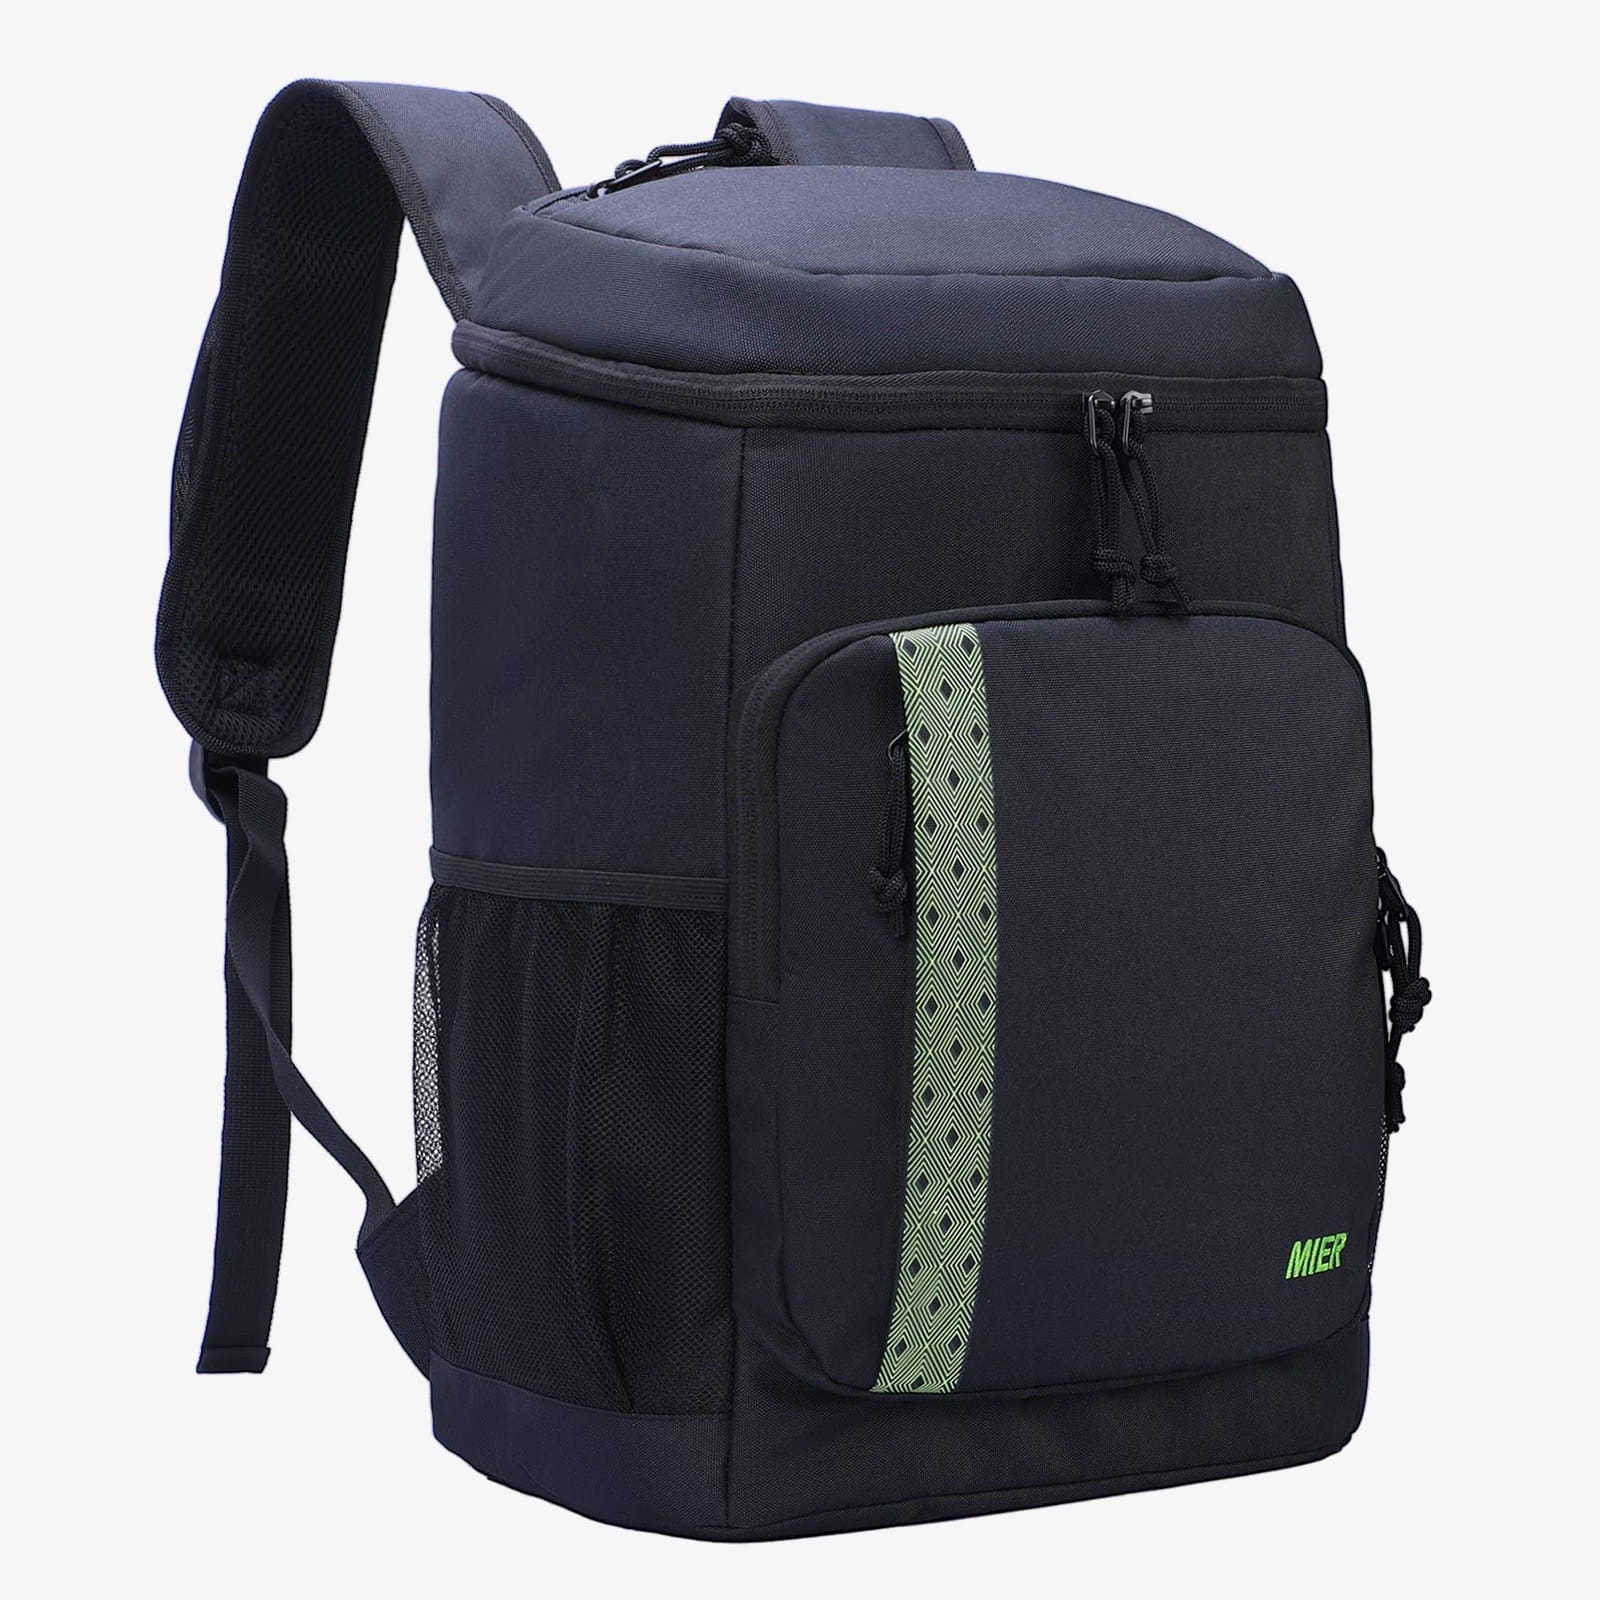 MIER Insulated Backpack Coolers Leakproof Lunch Pack